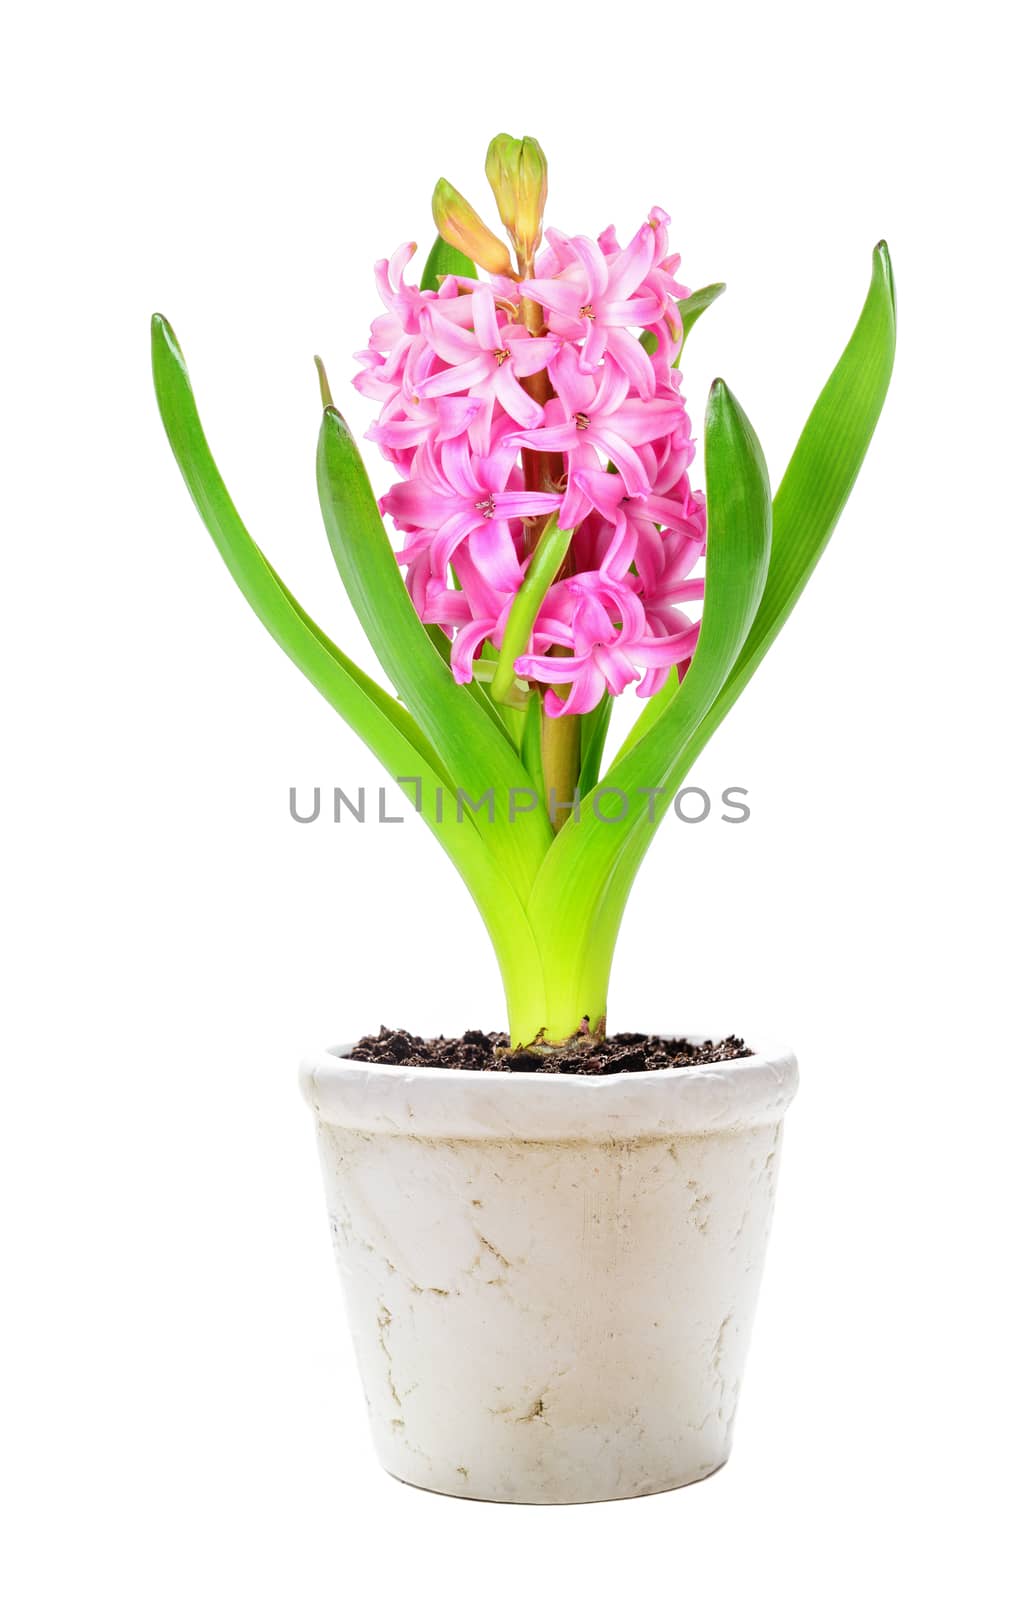 Pink hyacinth in a white ceramic flowerpot isolated on white background